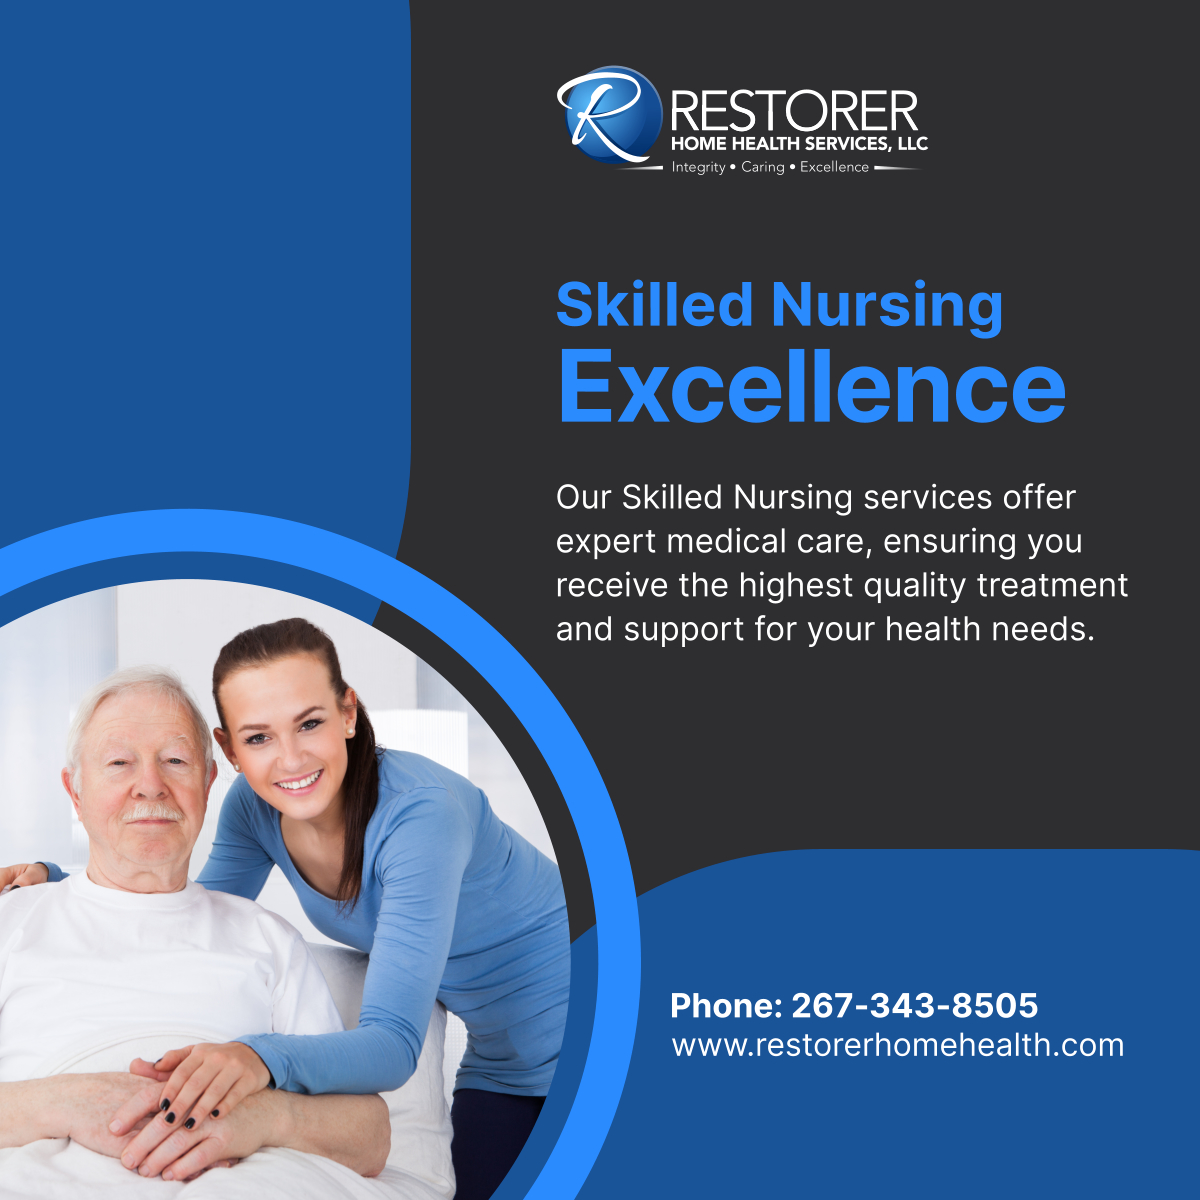 Experience expert medical care with our Skilled Nursing services. Your health is our priority. Reach out to us for professional assistance. 

#SkilledNursing #HomeHealthcare #PhiladelphiaPA